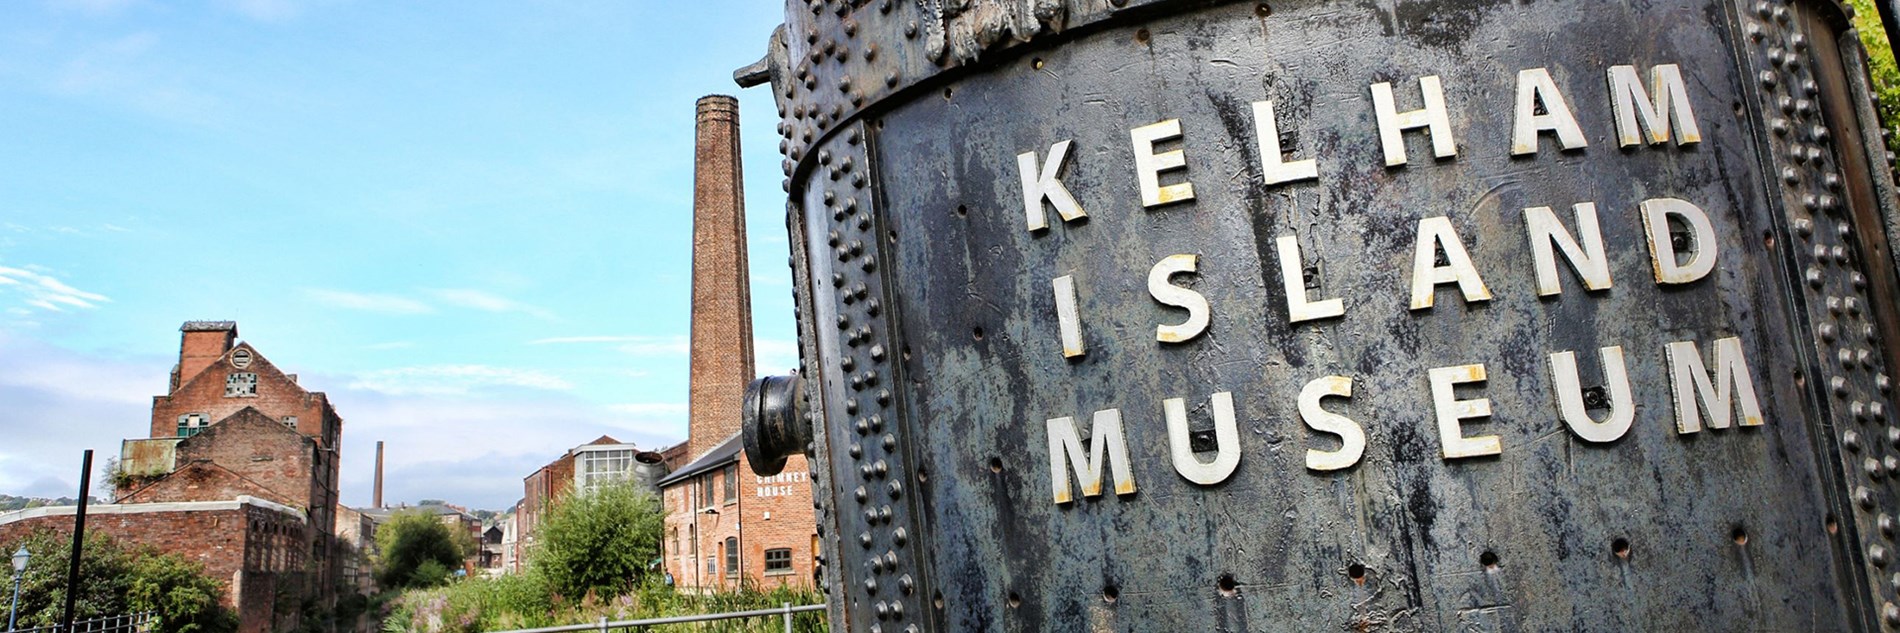 Huge metal industrial bucket with 'Kelham Island Museum' written on. Various buildings including one with a tall chimney are in the background.